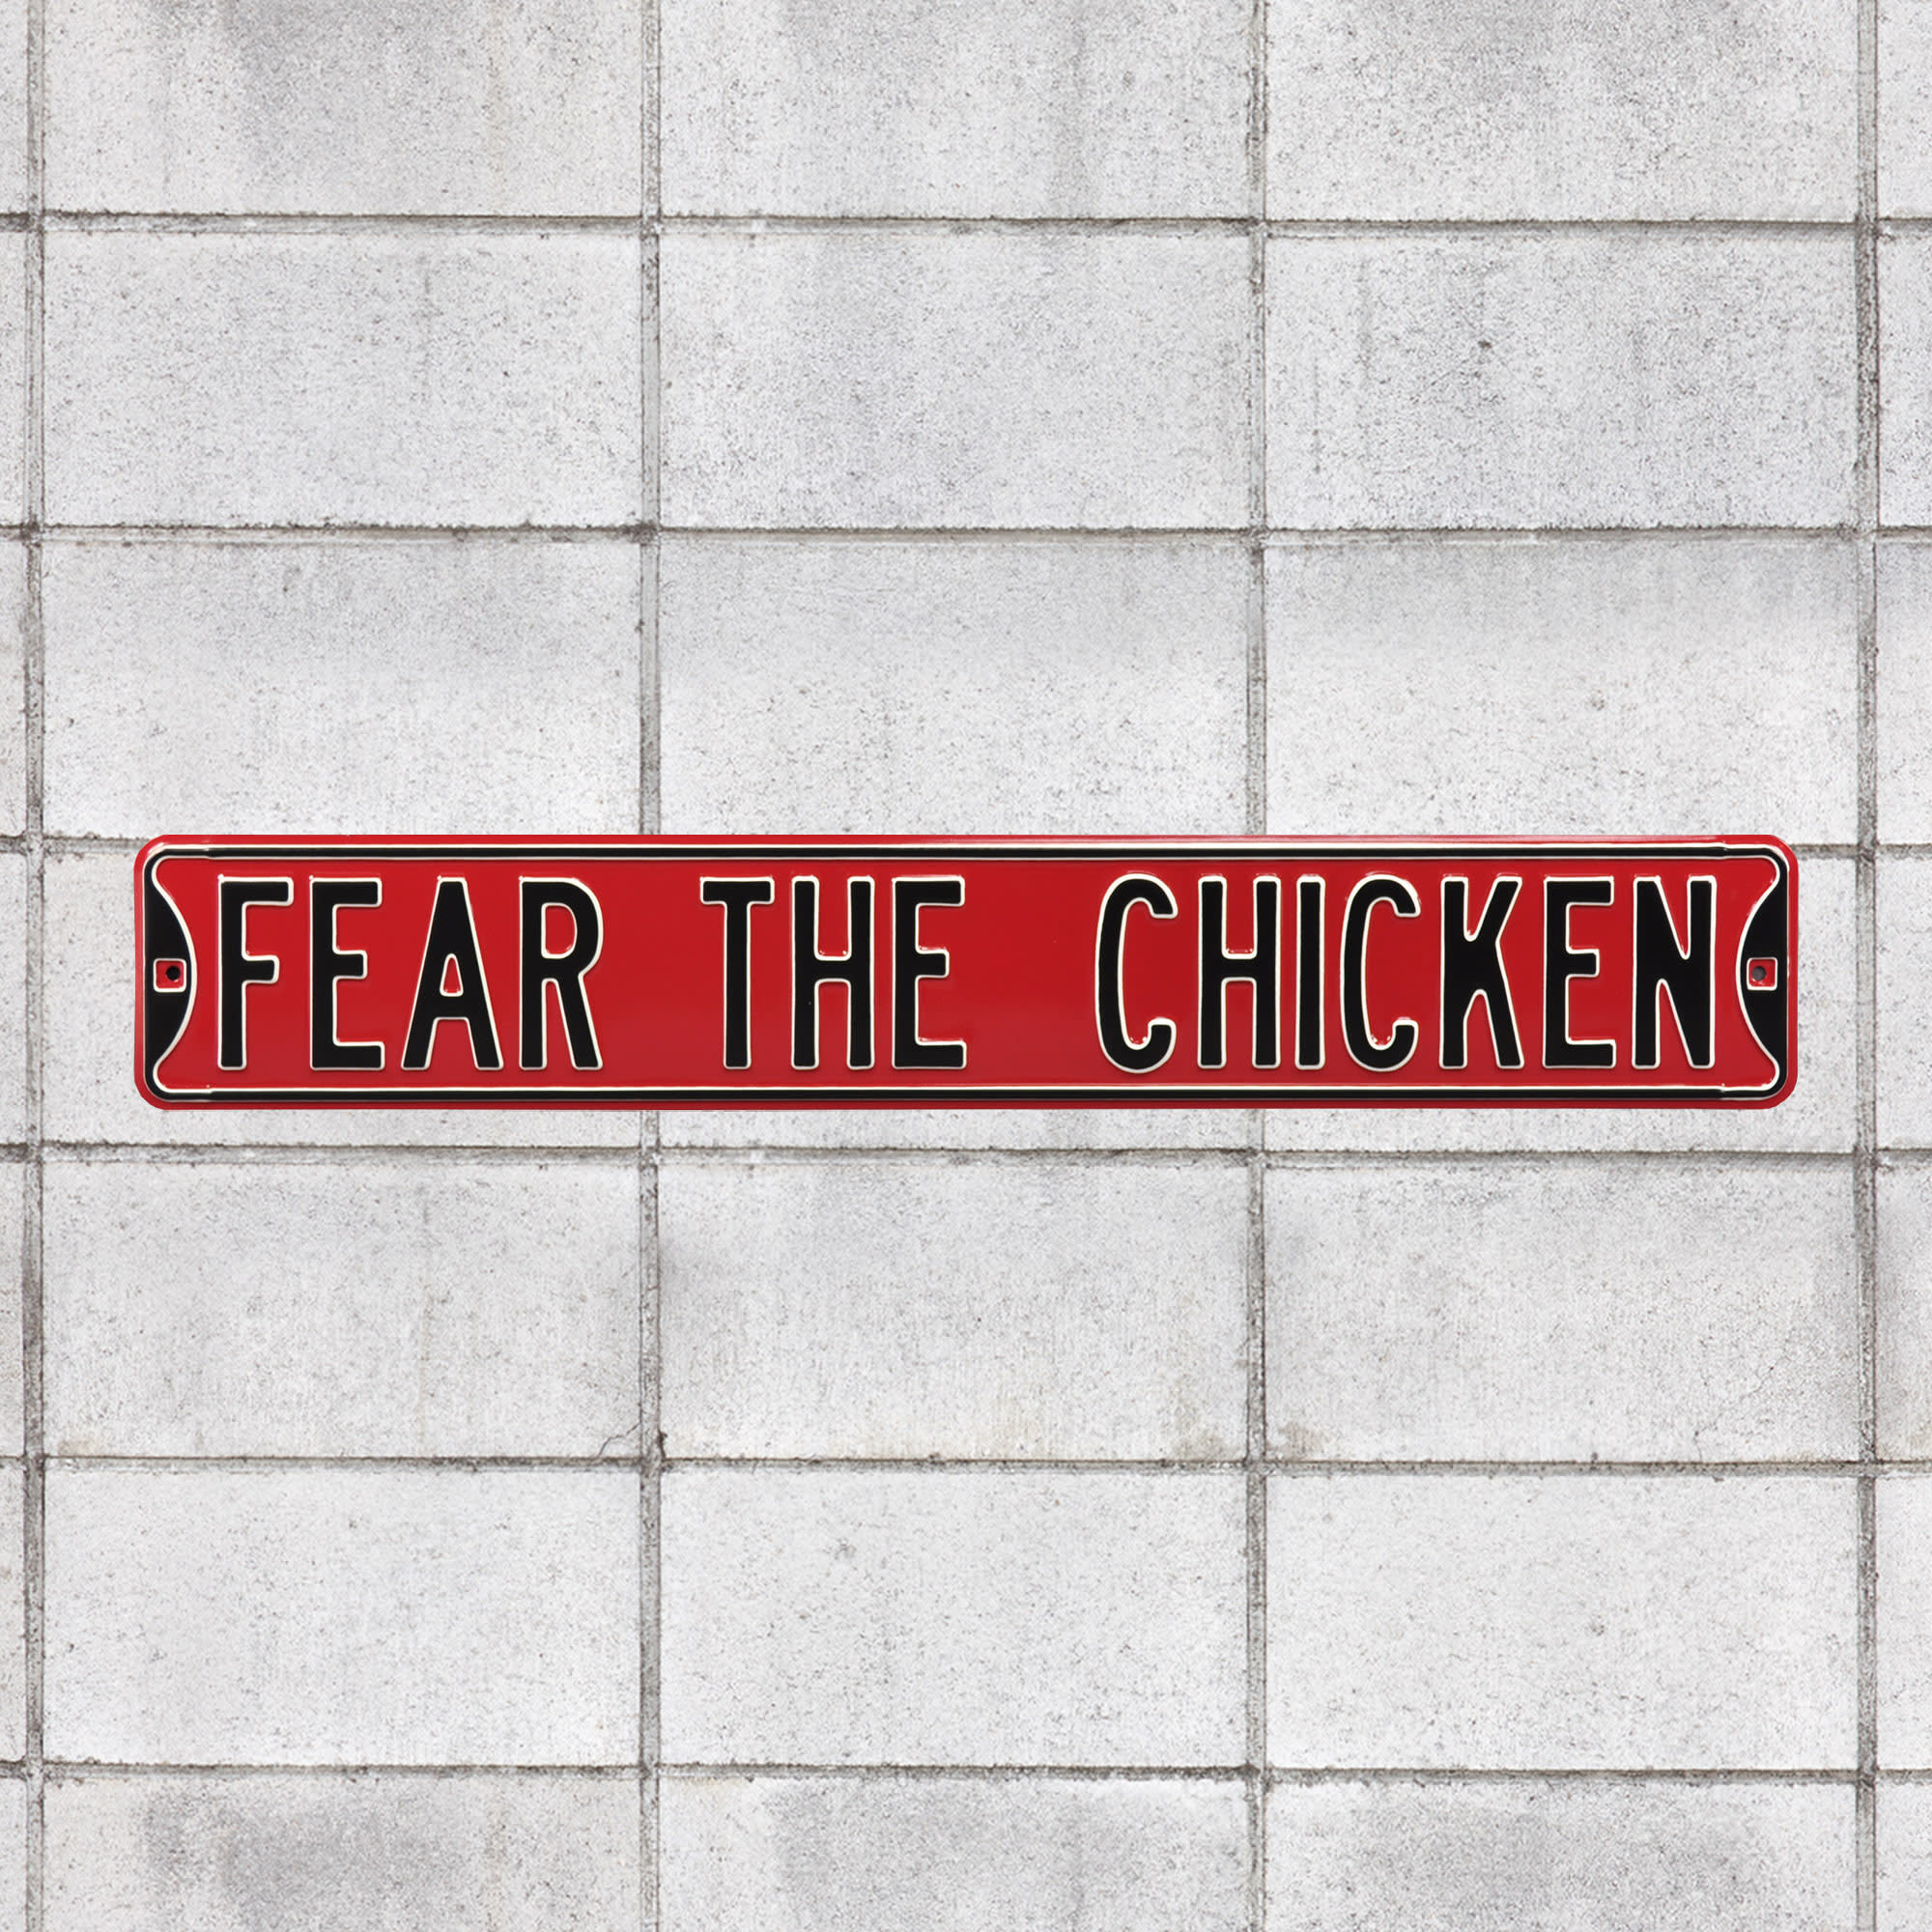 South Carolina Gamecocks: Fear the Chicken - Officially Licensed Metal Street Sign 36.0"W x 6.0"H by Fathead | 100% Steel